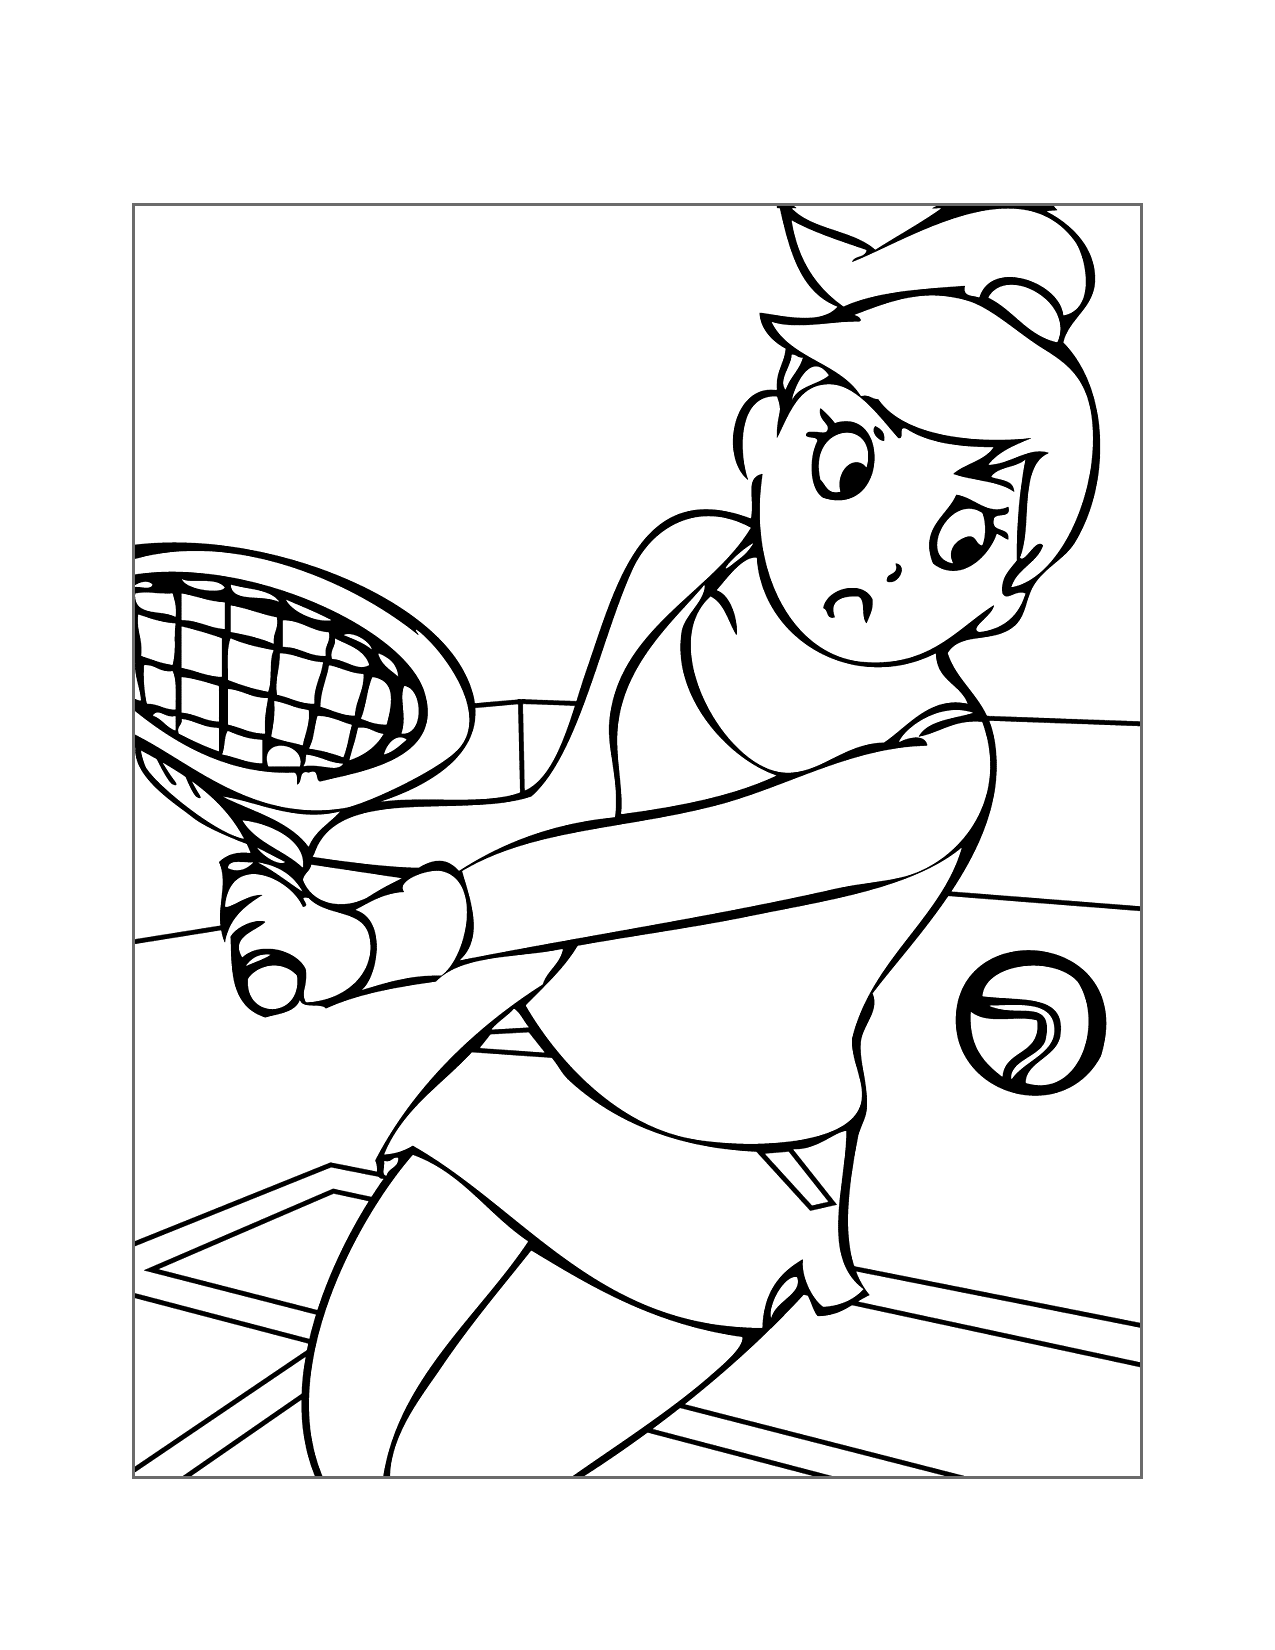 Cool Tennis Coloring Pages